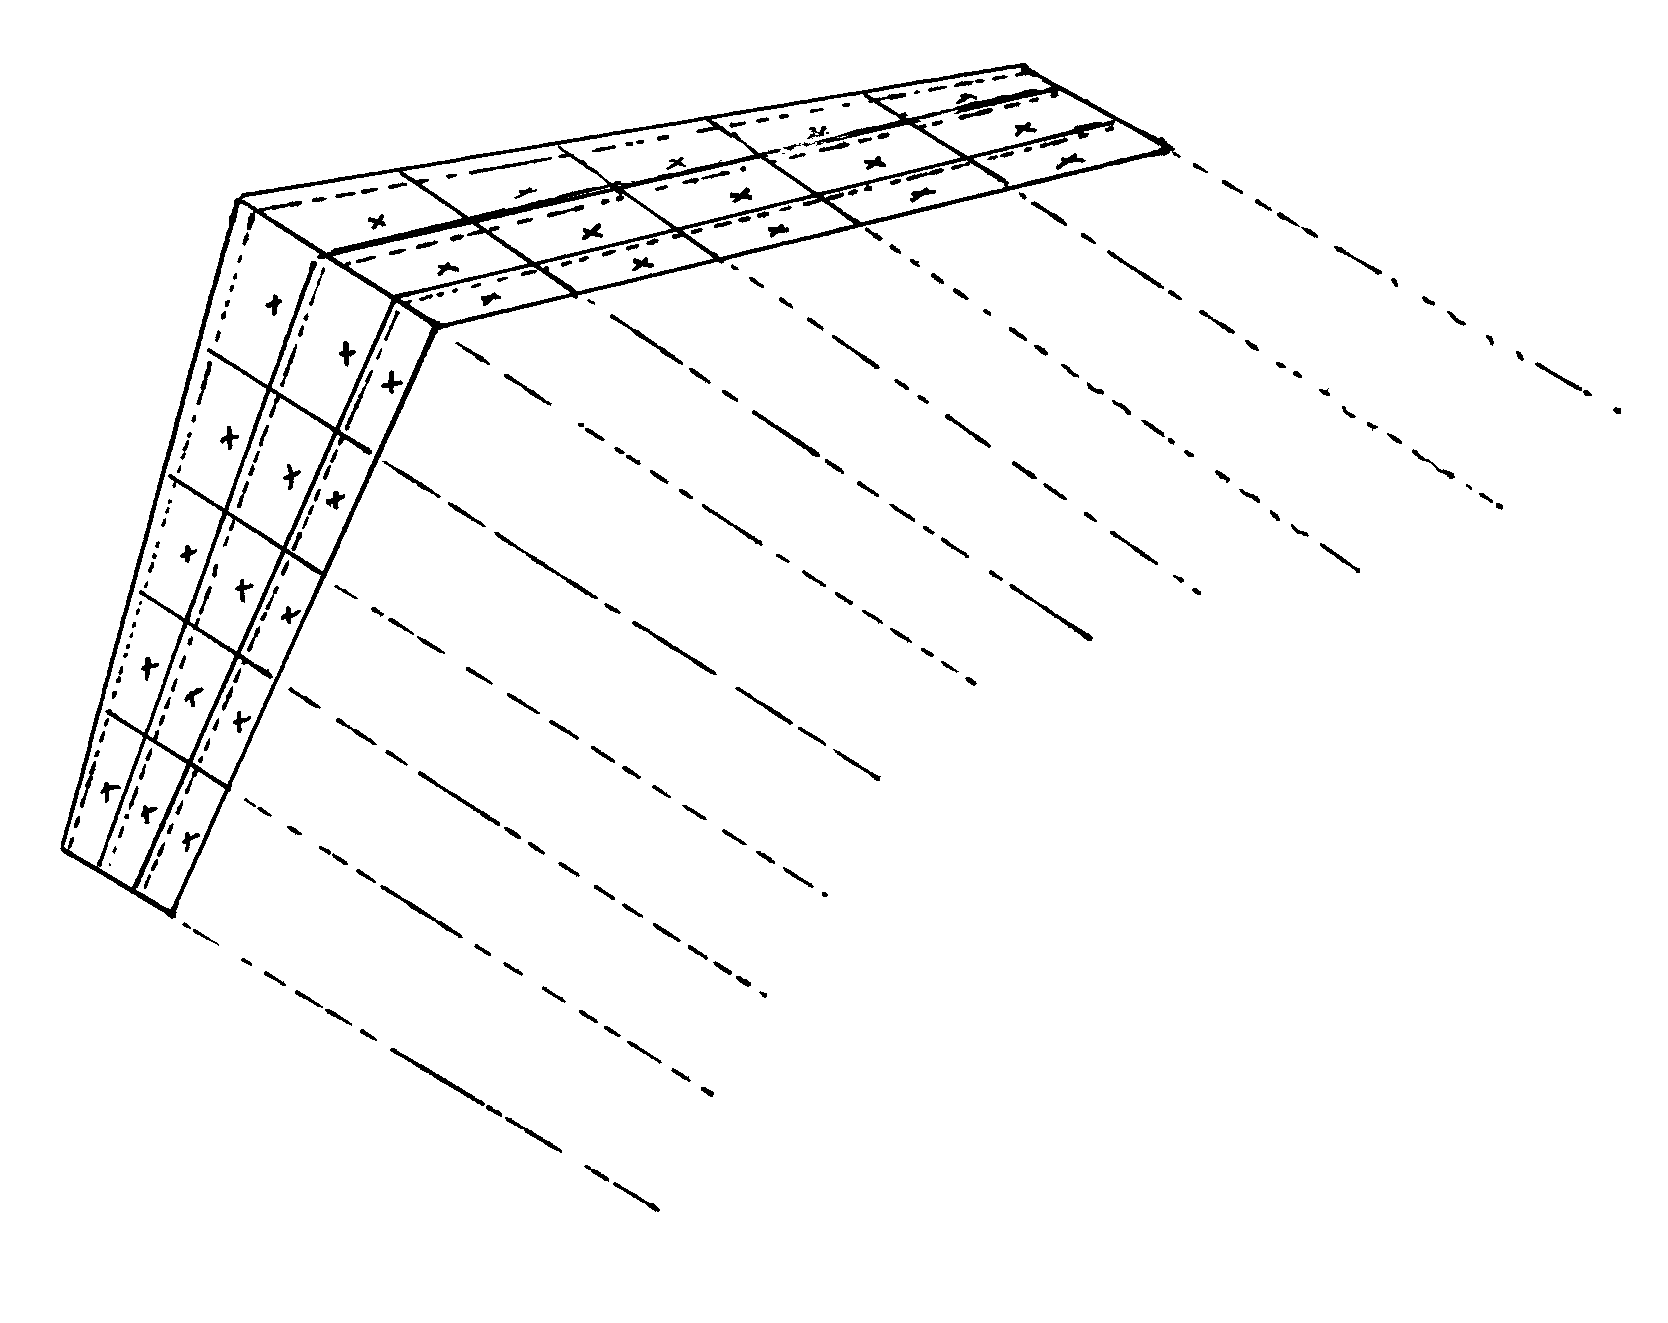 A symmetric swept-wing area is shown with 30 panels divided into 3 lines, with each half of the wing area having 5 panels in each line. Vortex lines trail through the shared edges between each pair of panels.